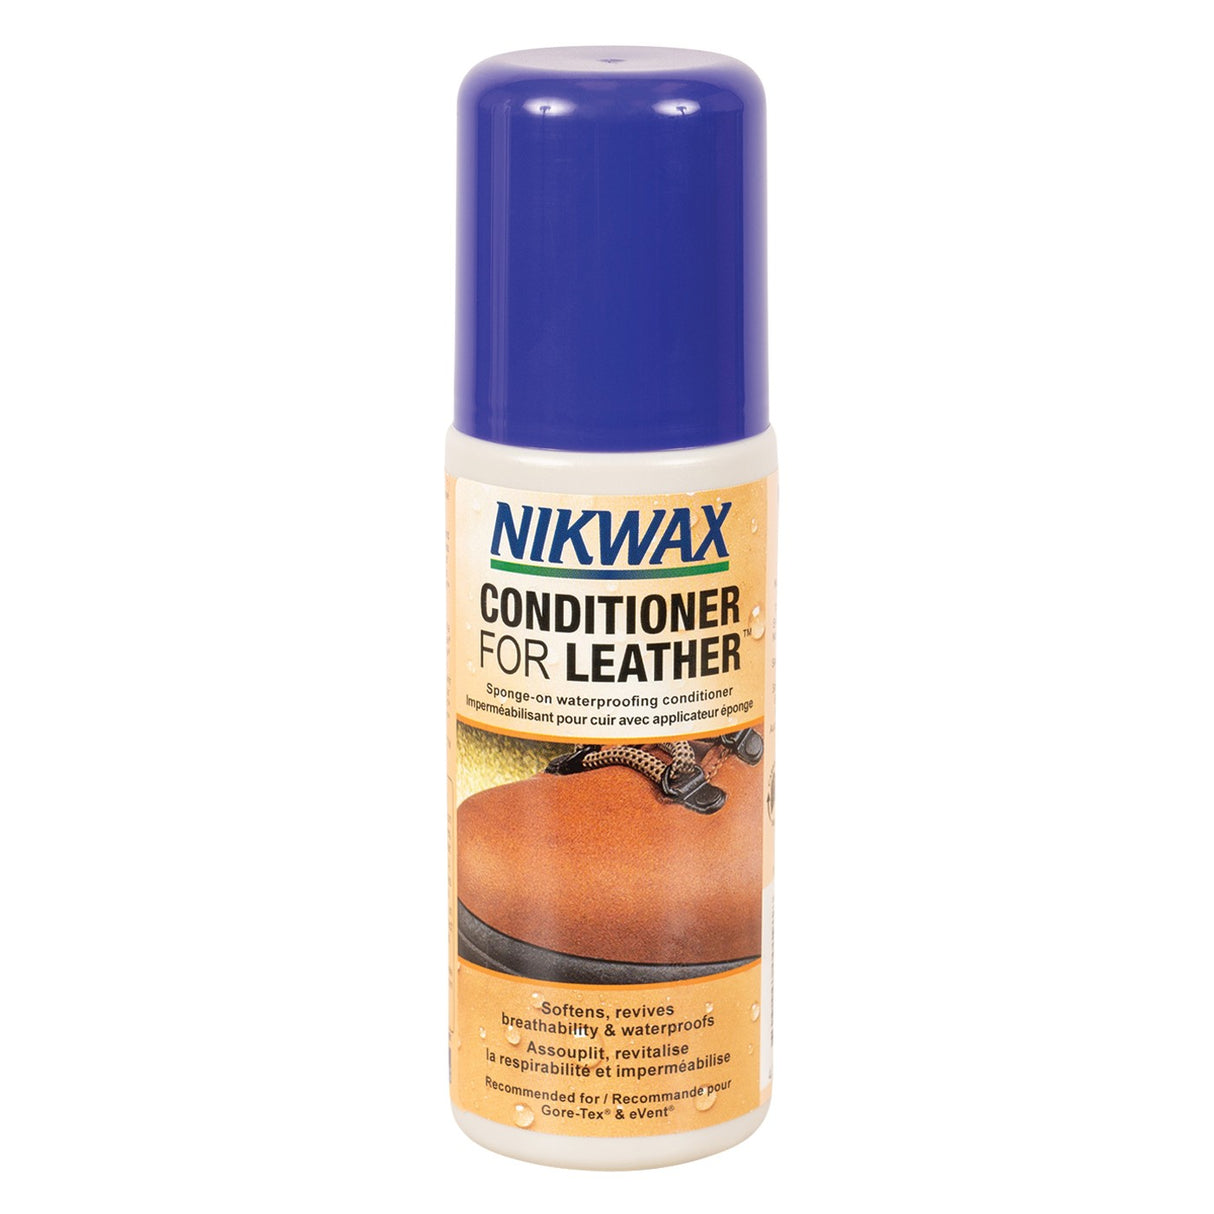 Nikwax Conditioner for Leather 125 mL